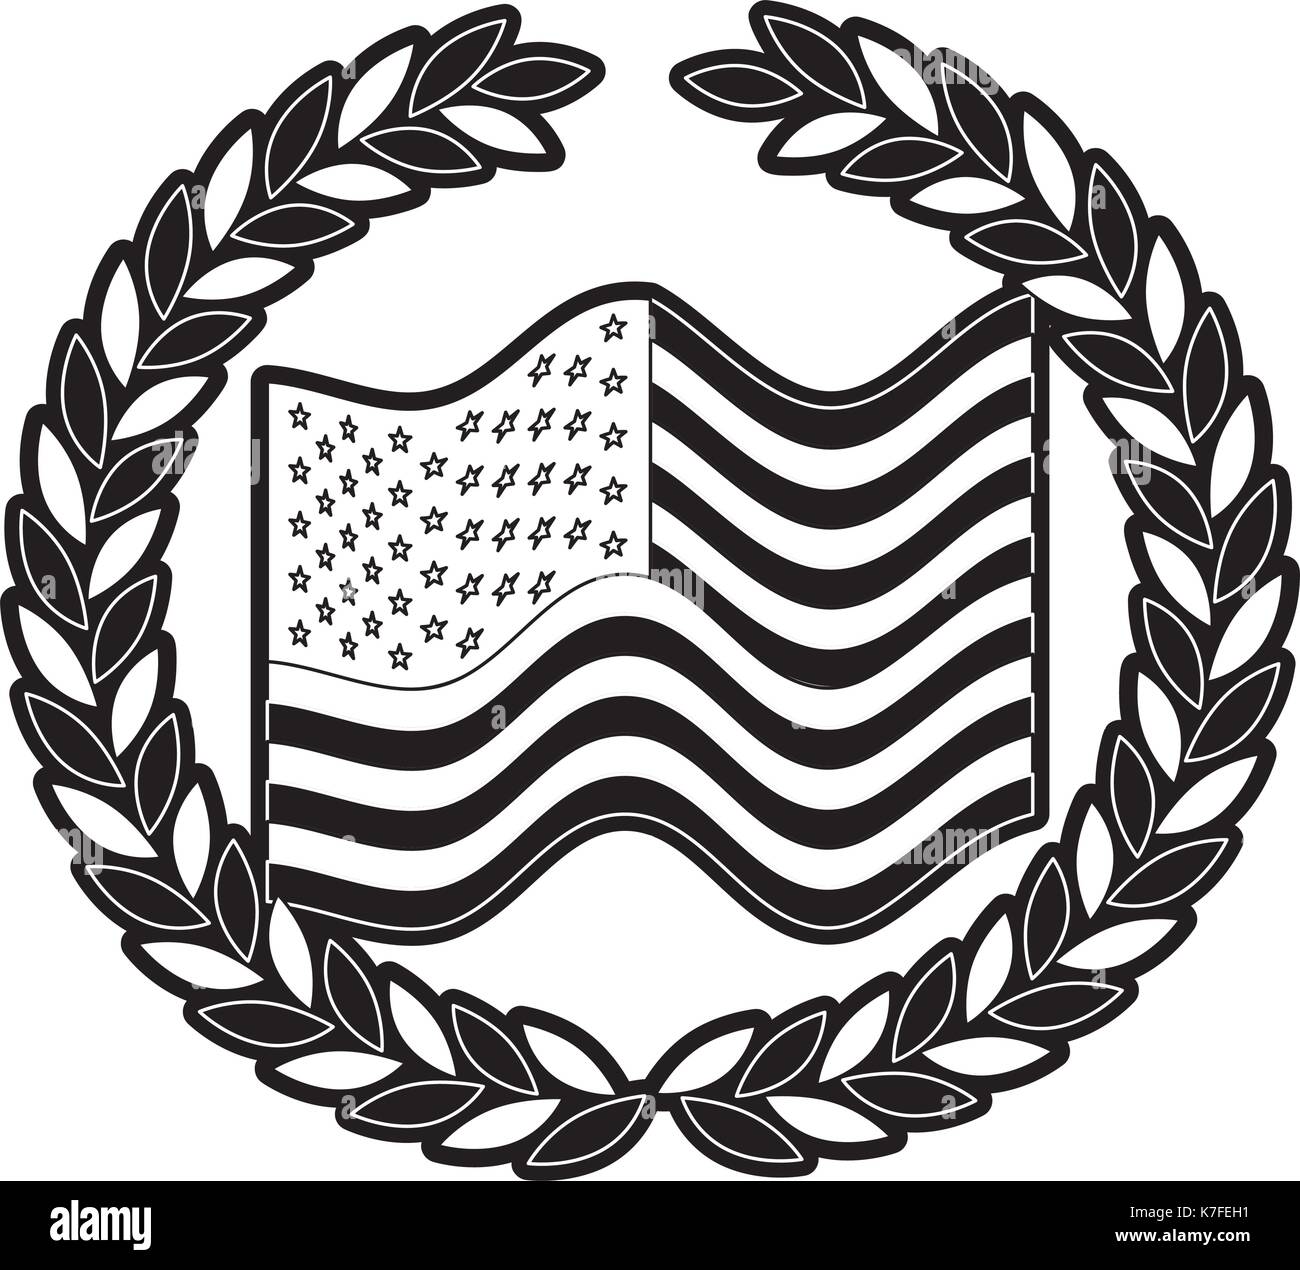 united states flag with circular crown of olive branches in monochrome silhouette Stock Vector